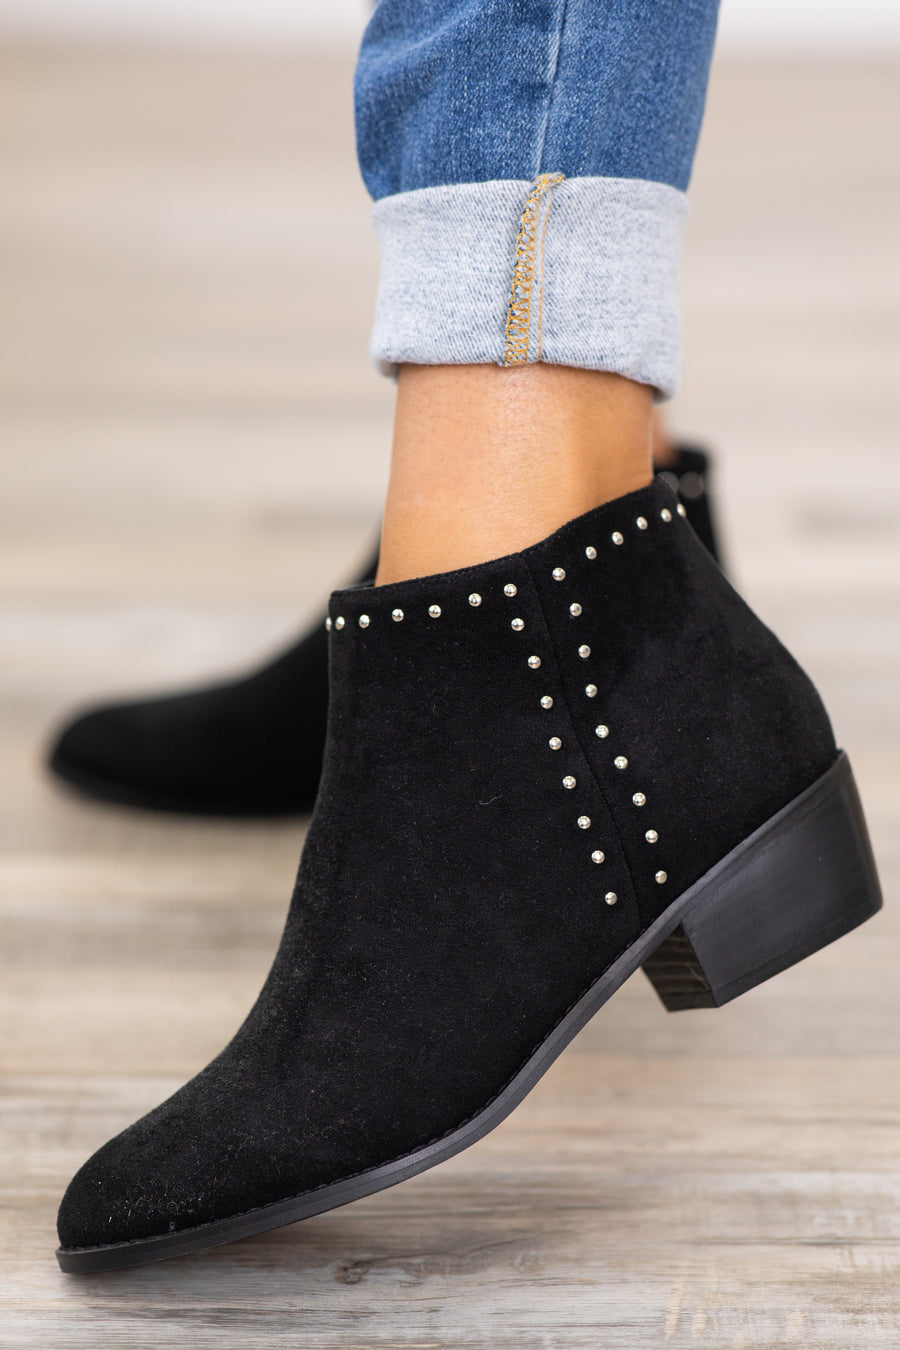 Black Ankle Booties With Stud Detail